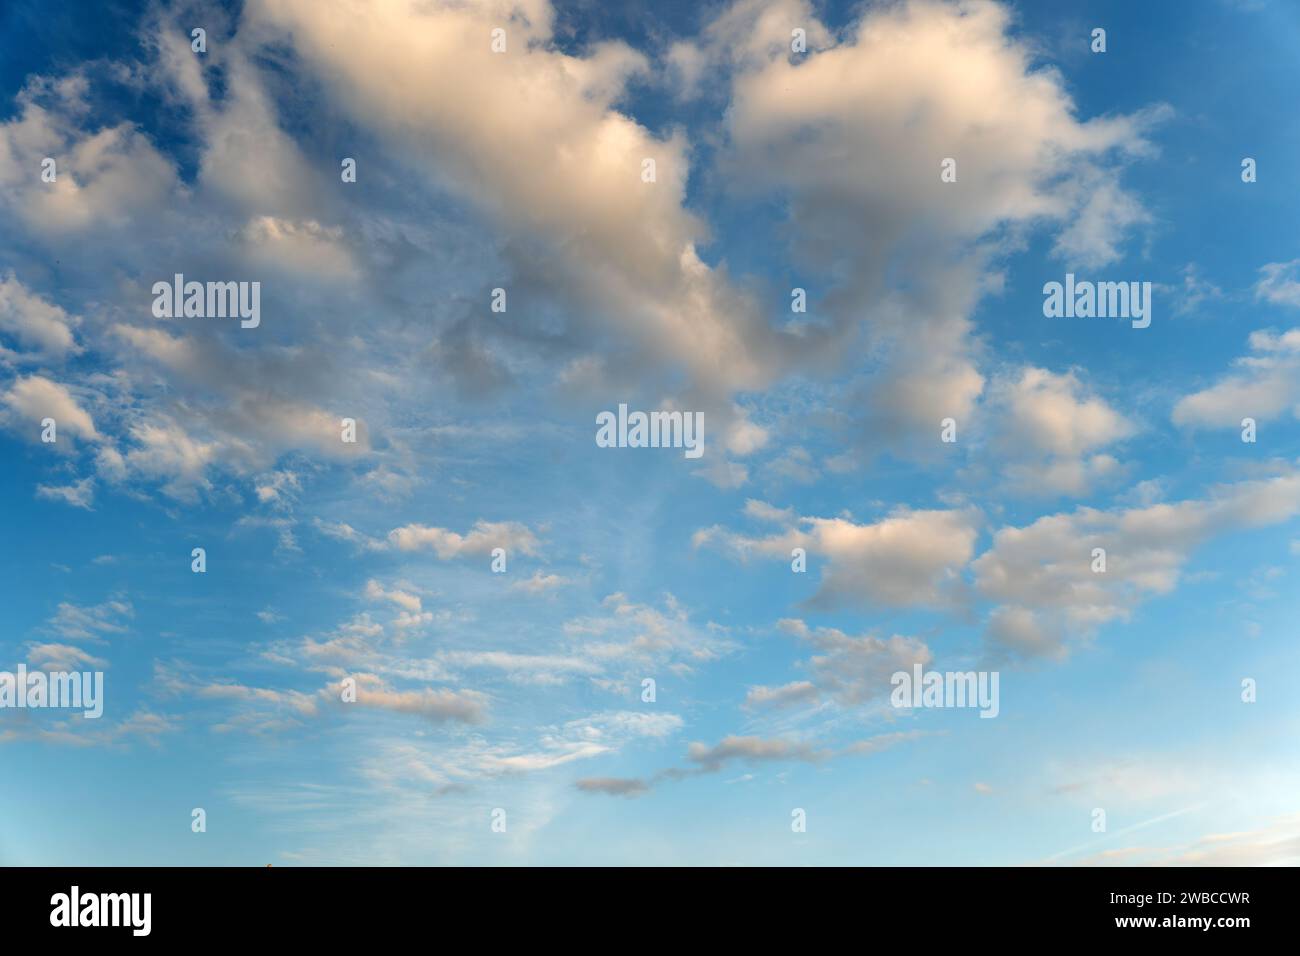 Blue sky background with white clouds Stock Photo